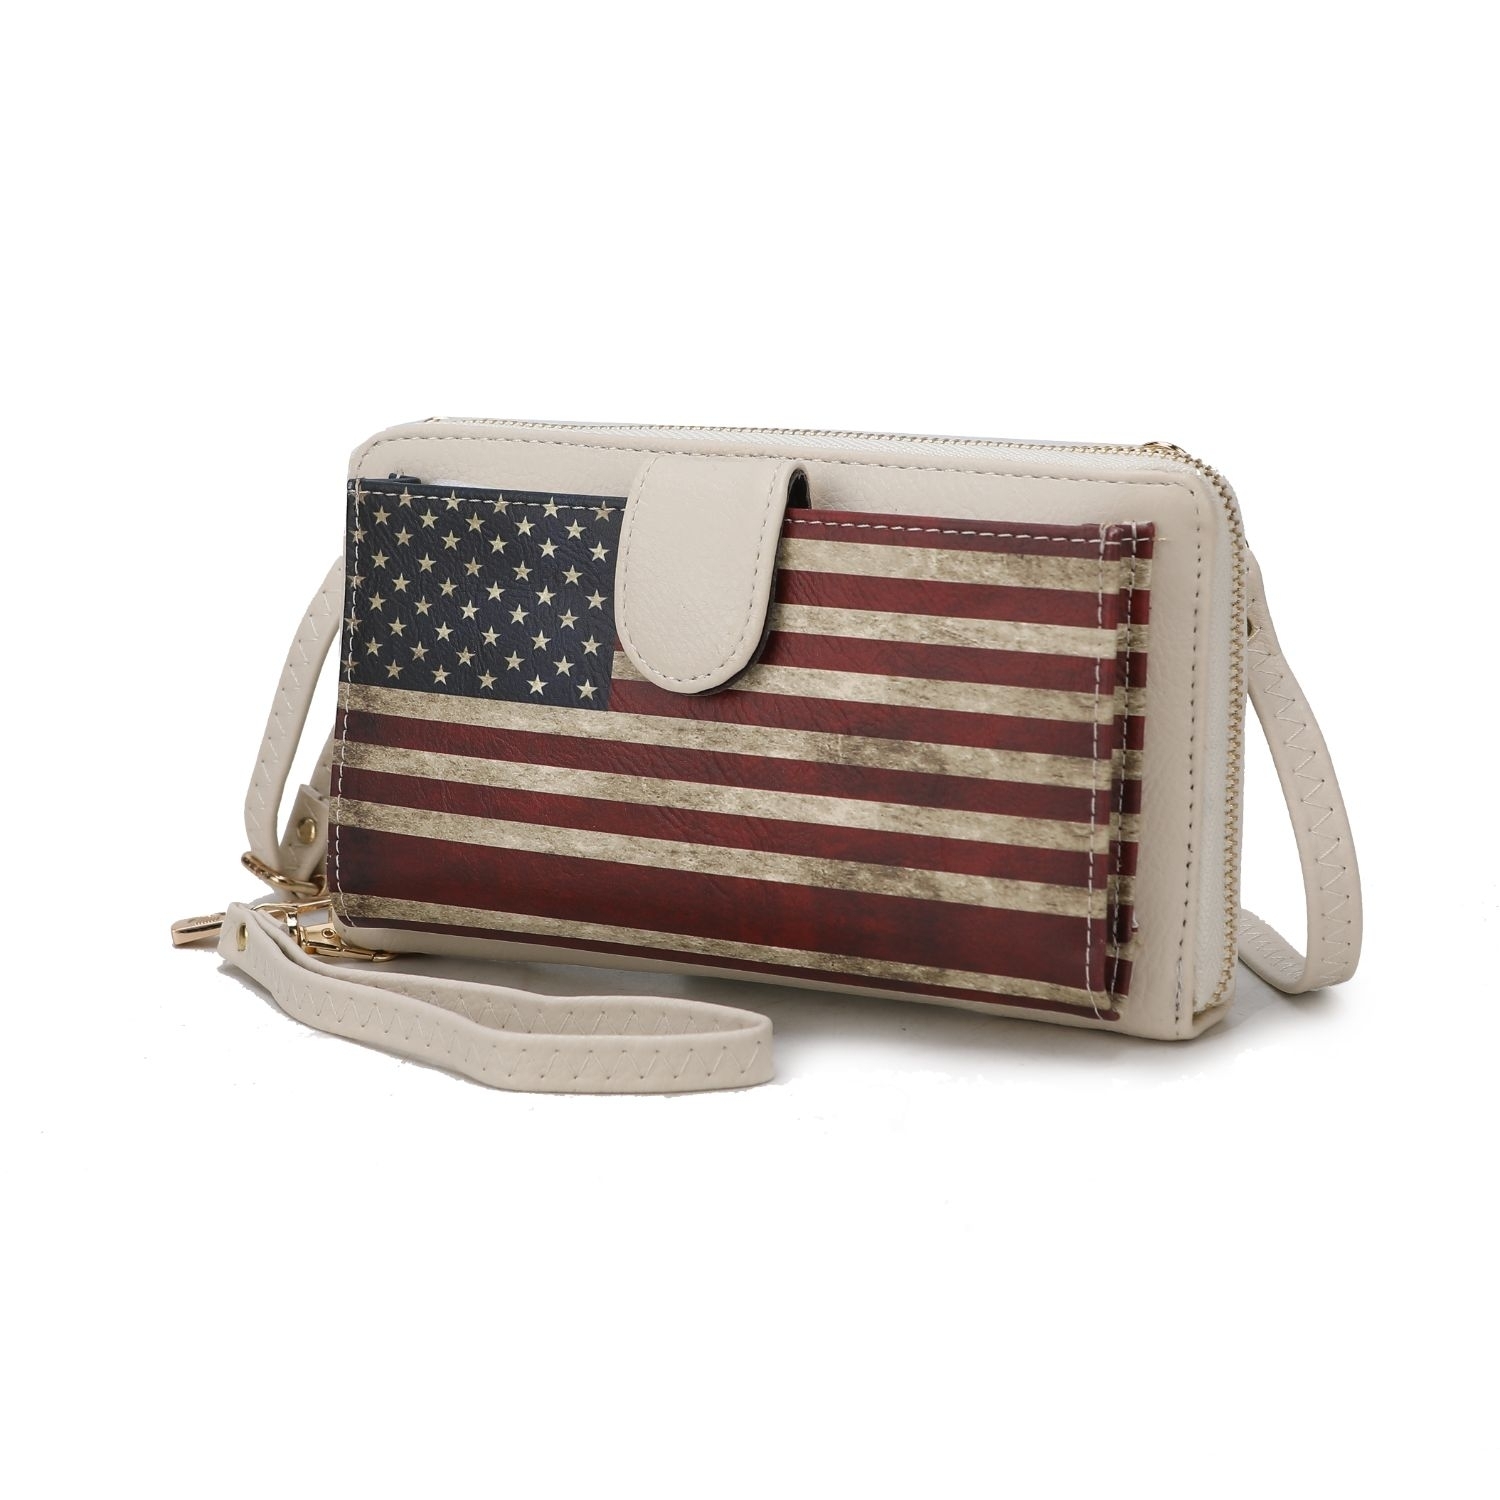 MKF Collection Kiara Smartphone And Wallet Convertible FLAG Crossbody Bag By Mia K - Taupe